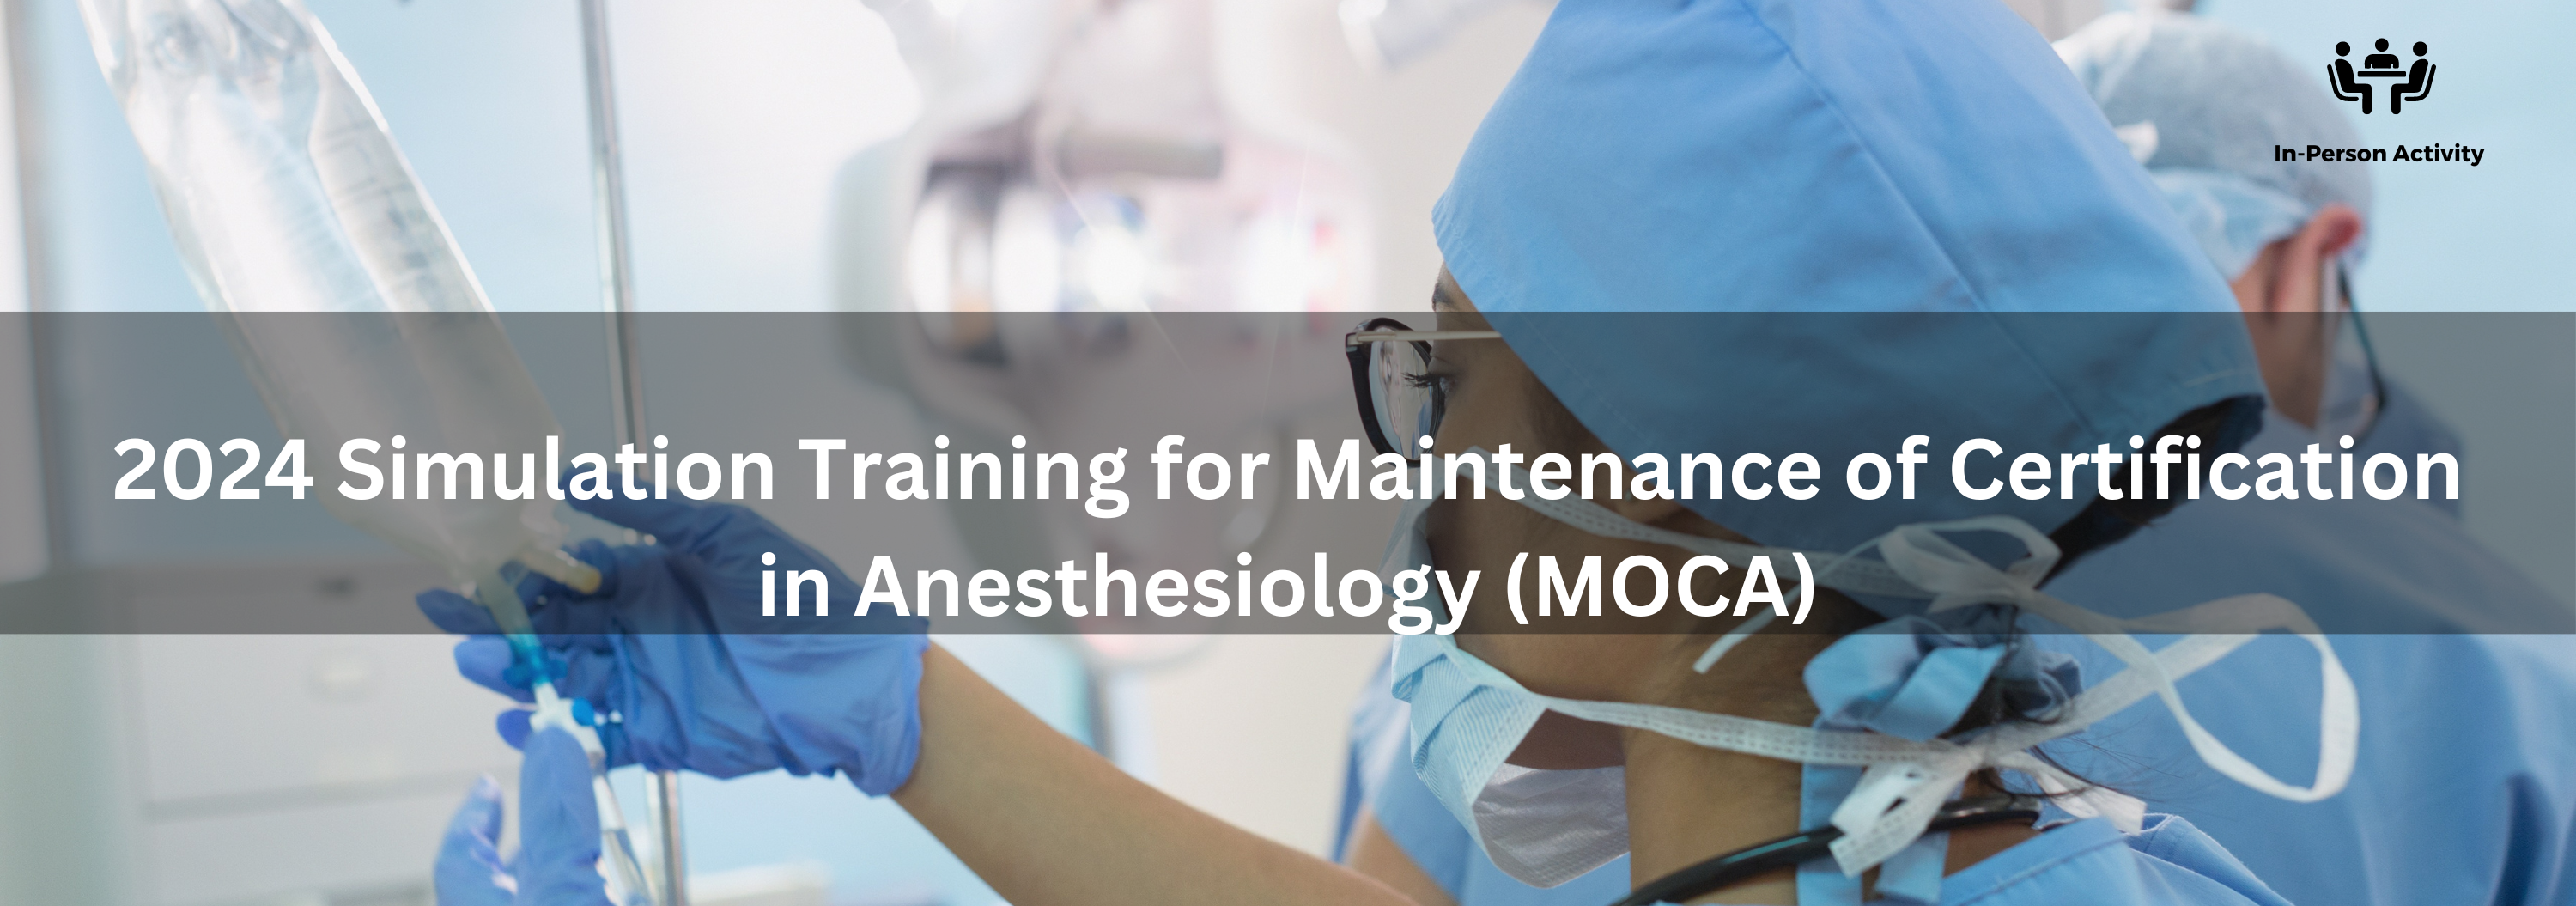 2024 Simulation Training for Maintenance of Certification in Anesthesiology (MOCA) - December Banner